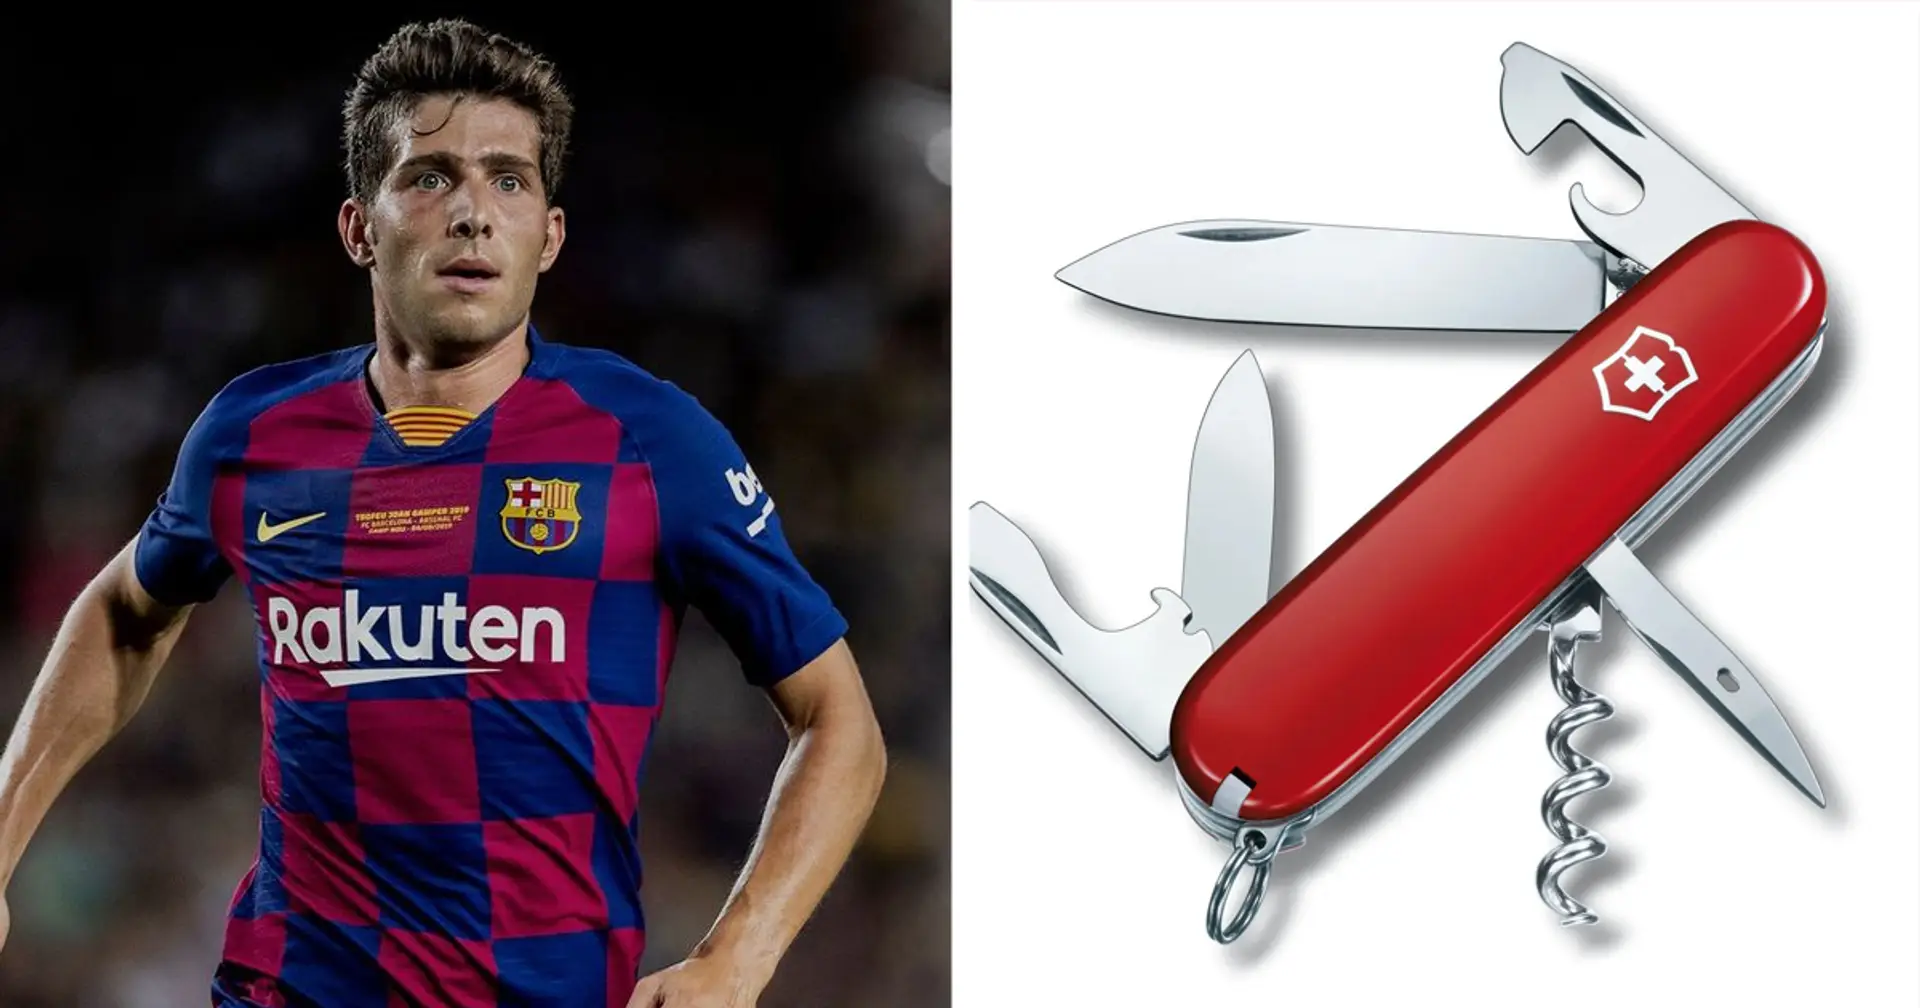 Swiss army knife Roberto, tank Pique and more: what if Barca defenders were weapons